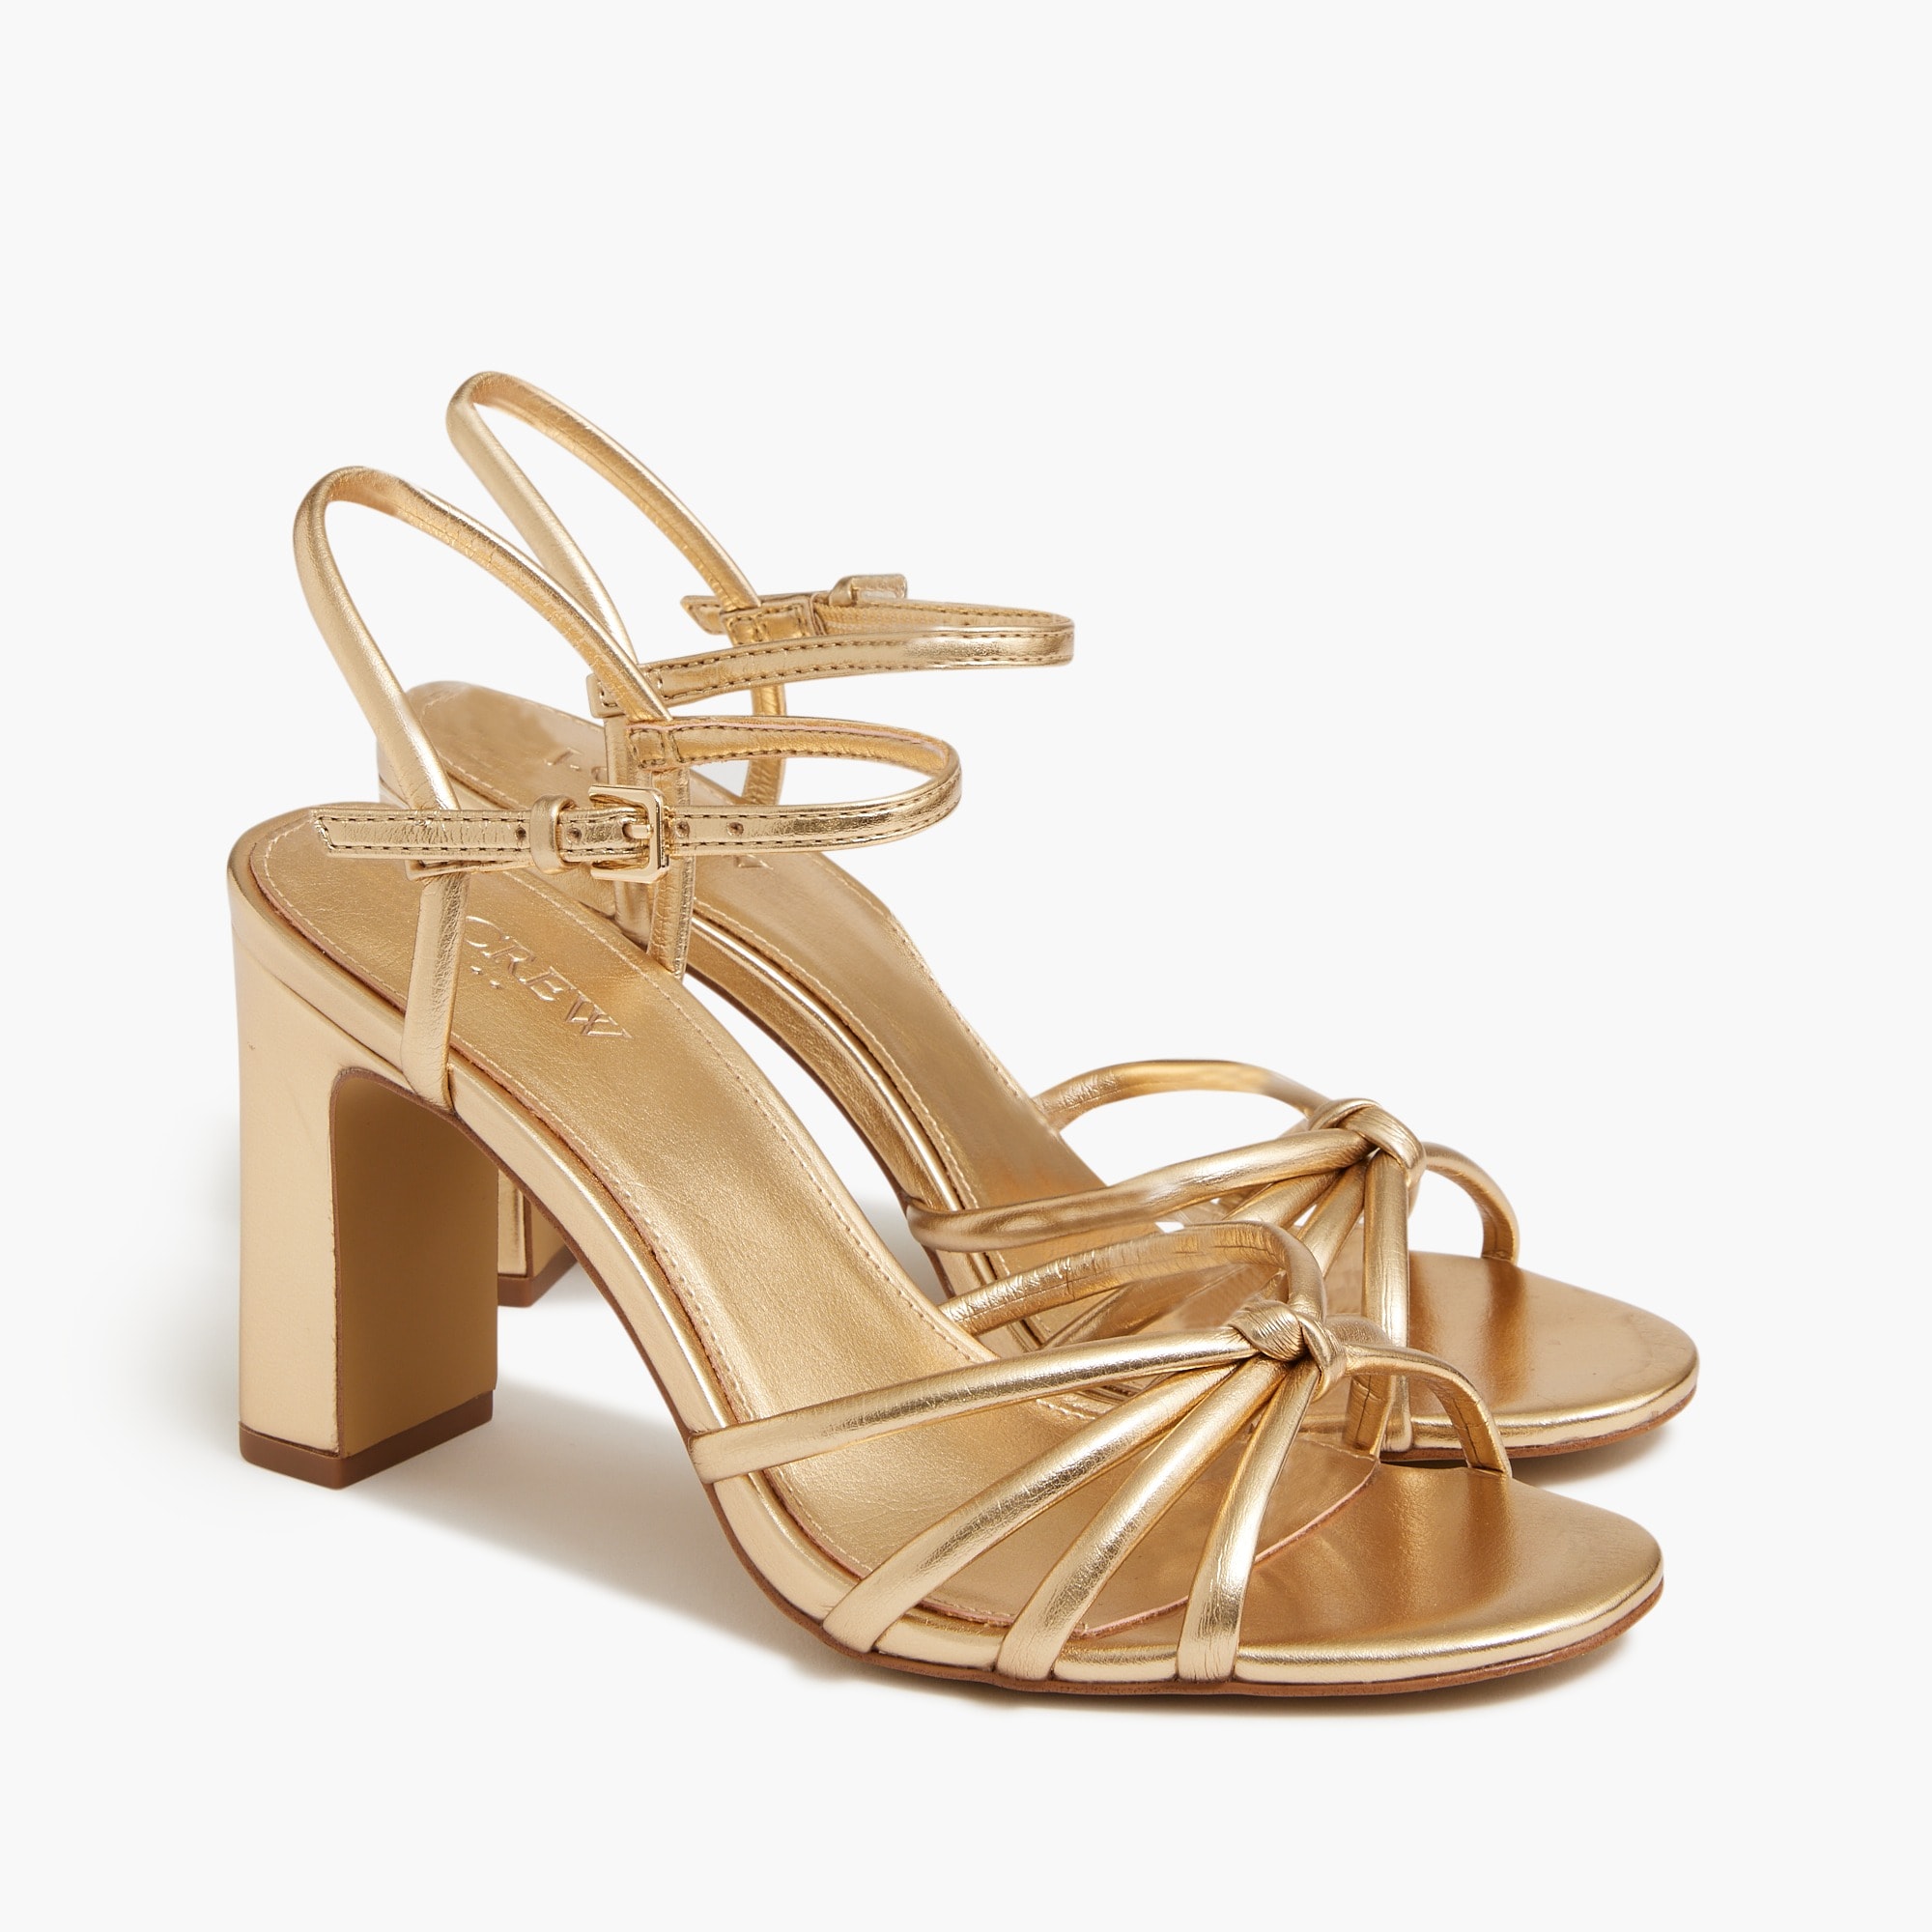  Skinny-strap knotted heeled sandals